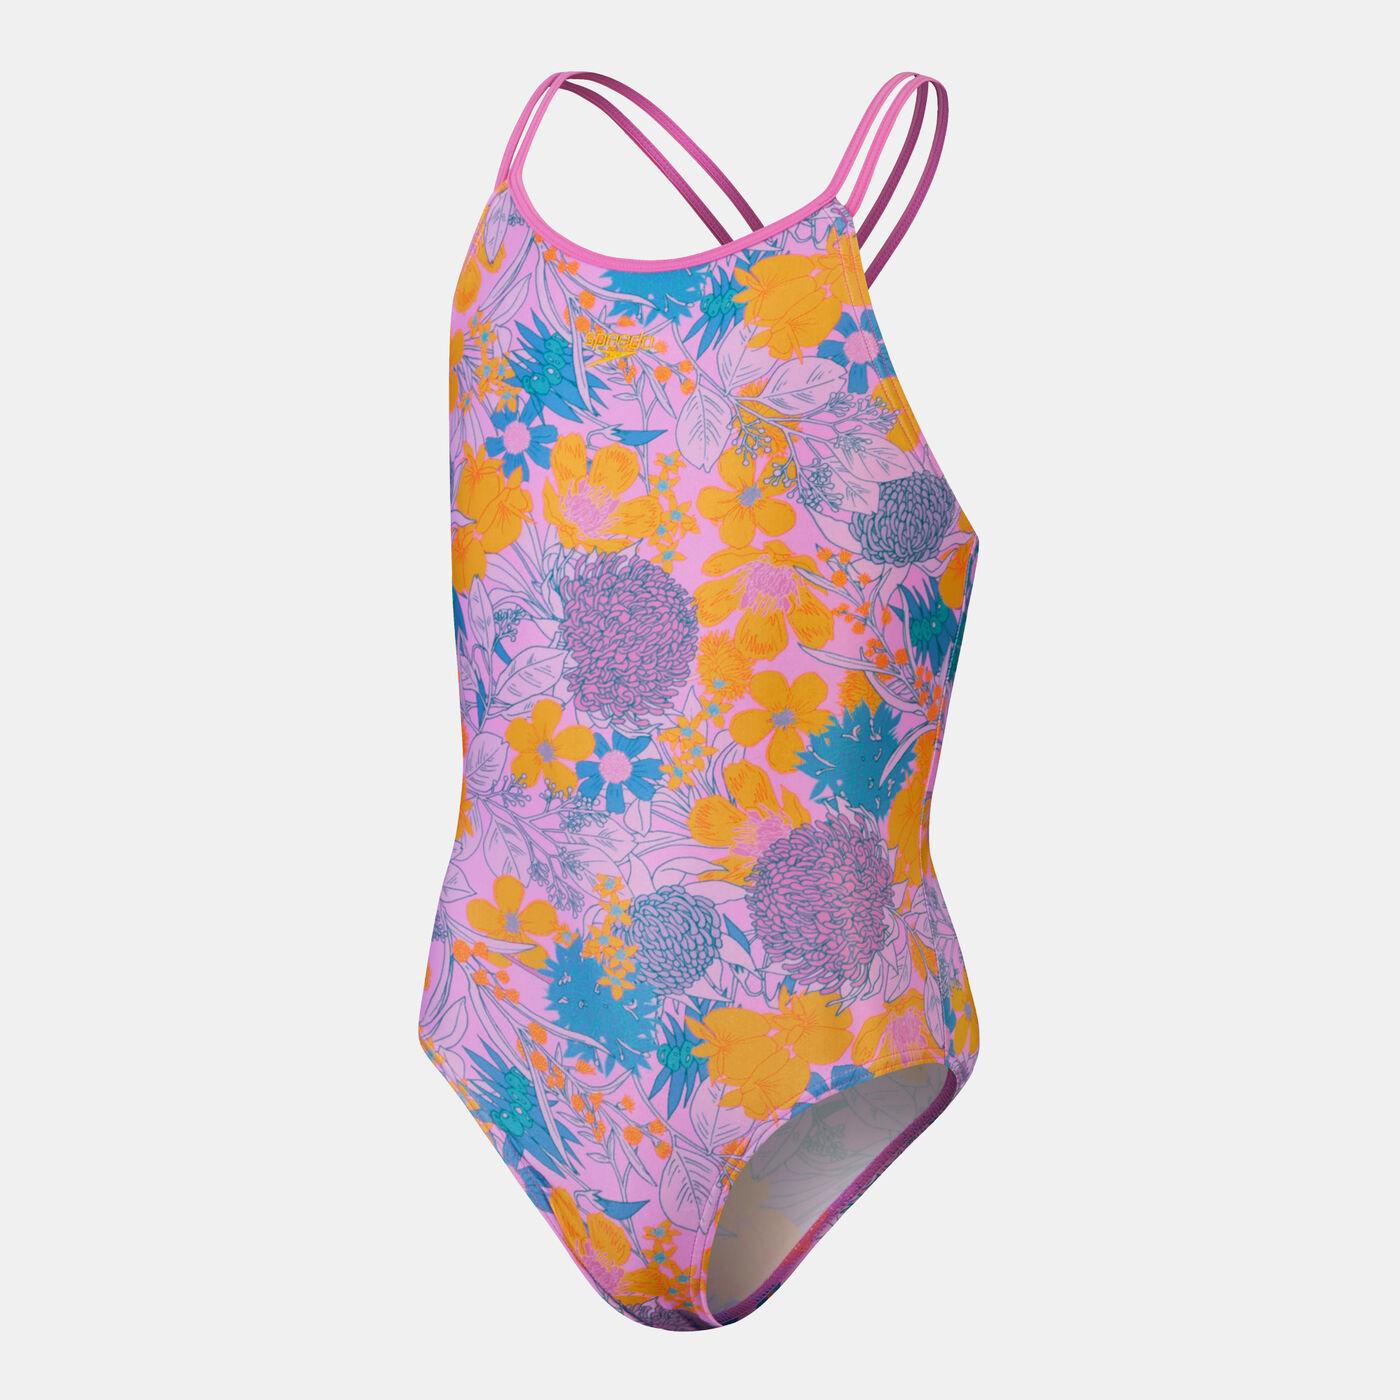 Kids' Printed Twinstrap Swimsuit